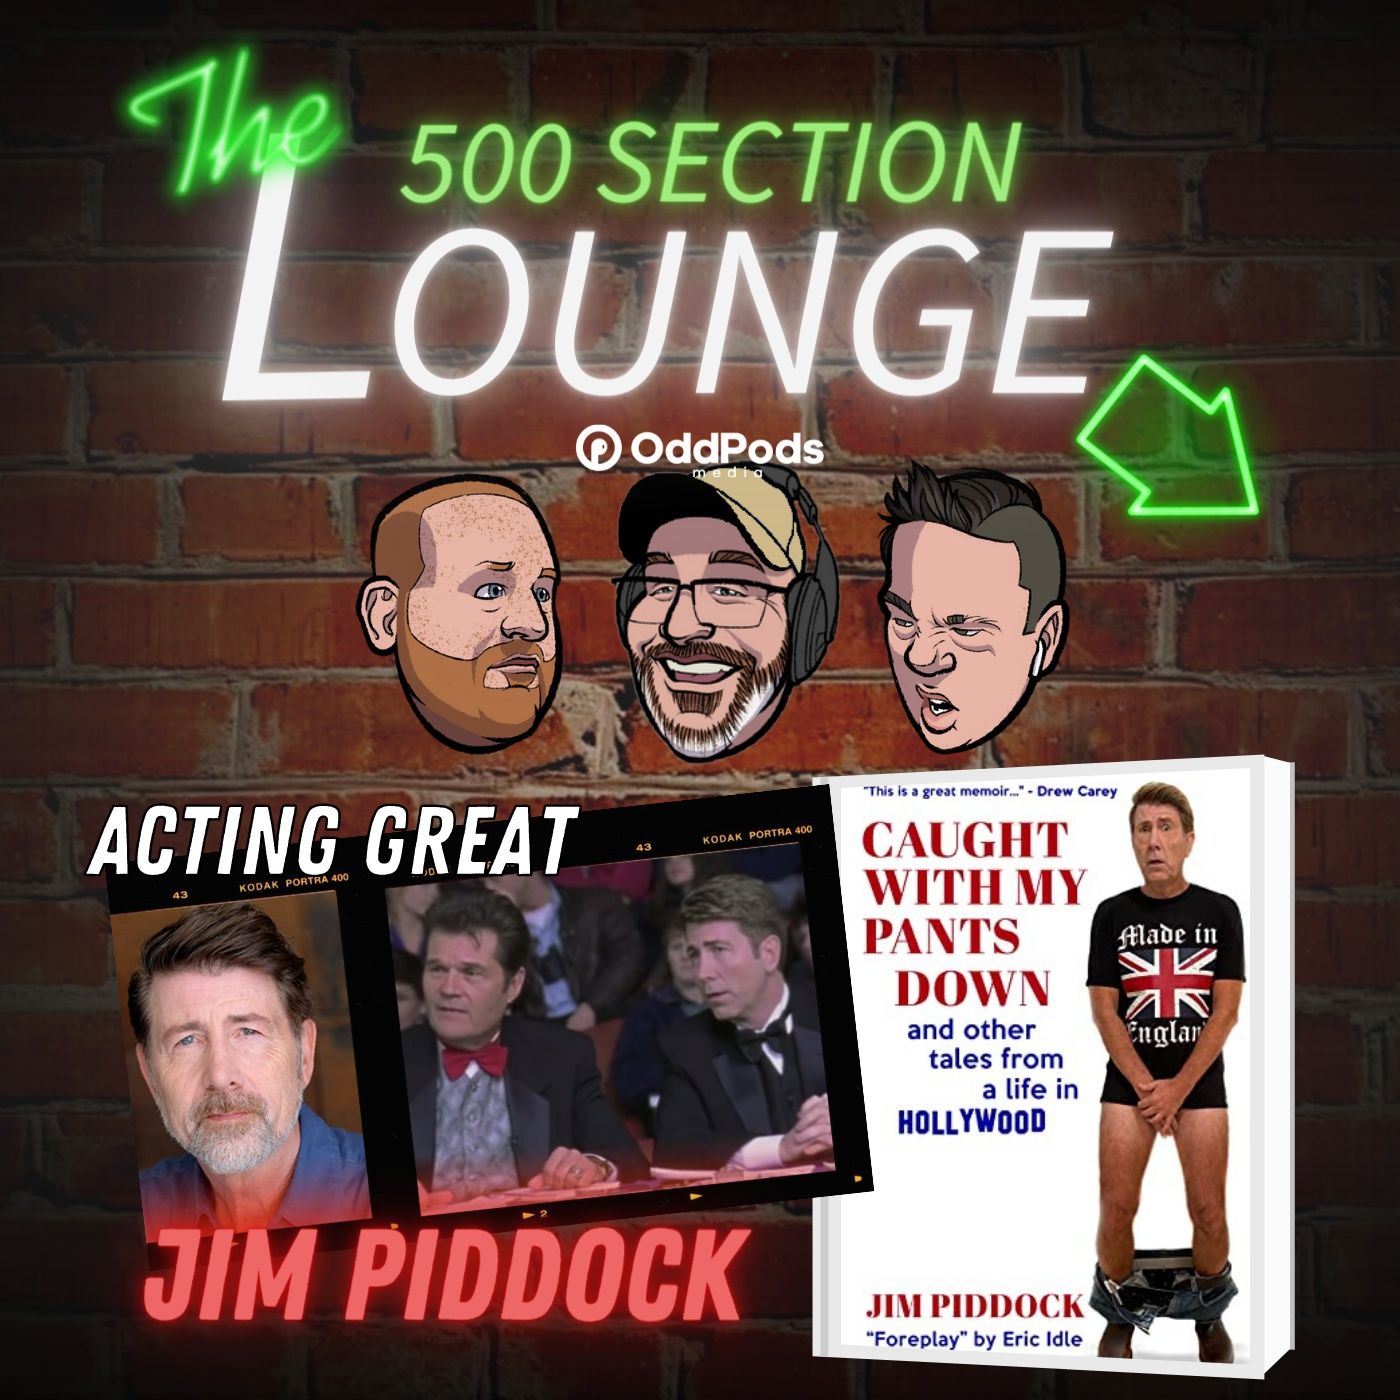 E122: Jim Piddock Gets CAUGHT In the Lounge! Image